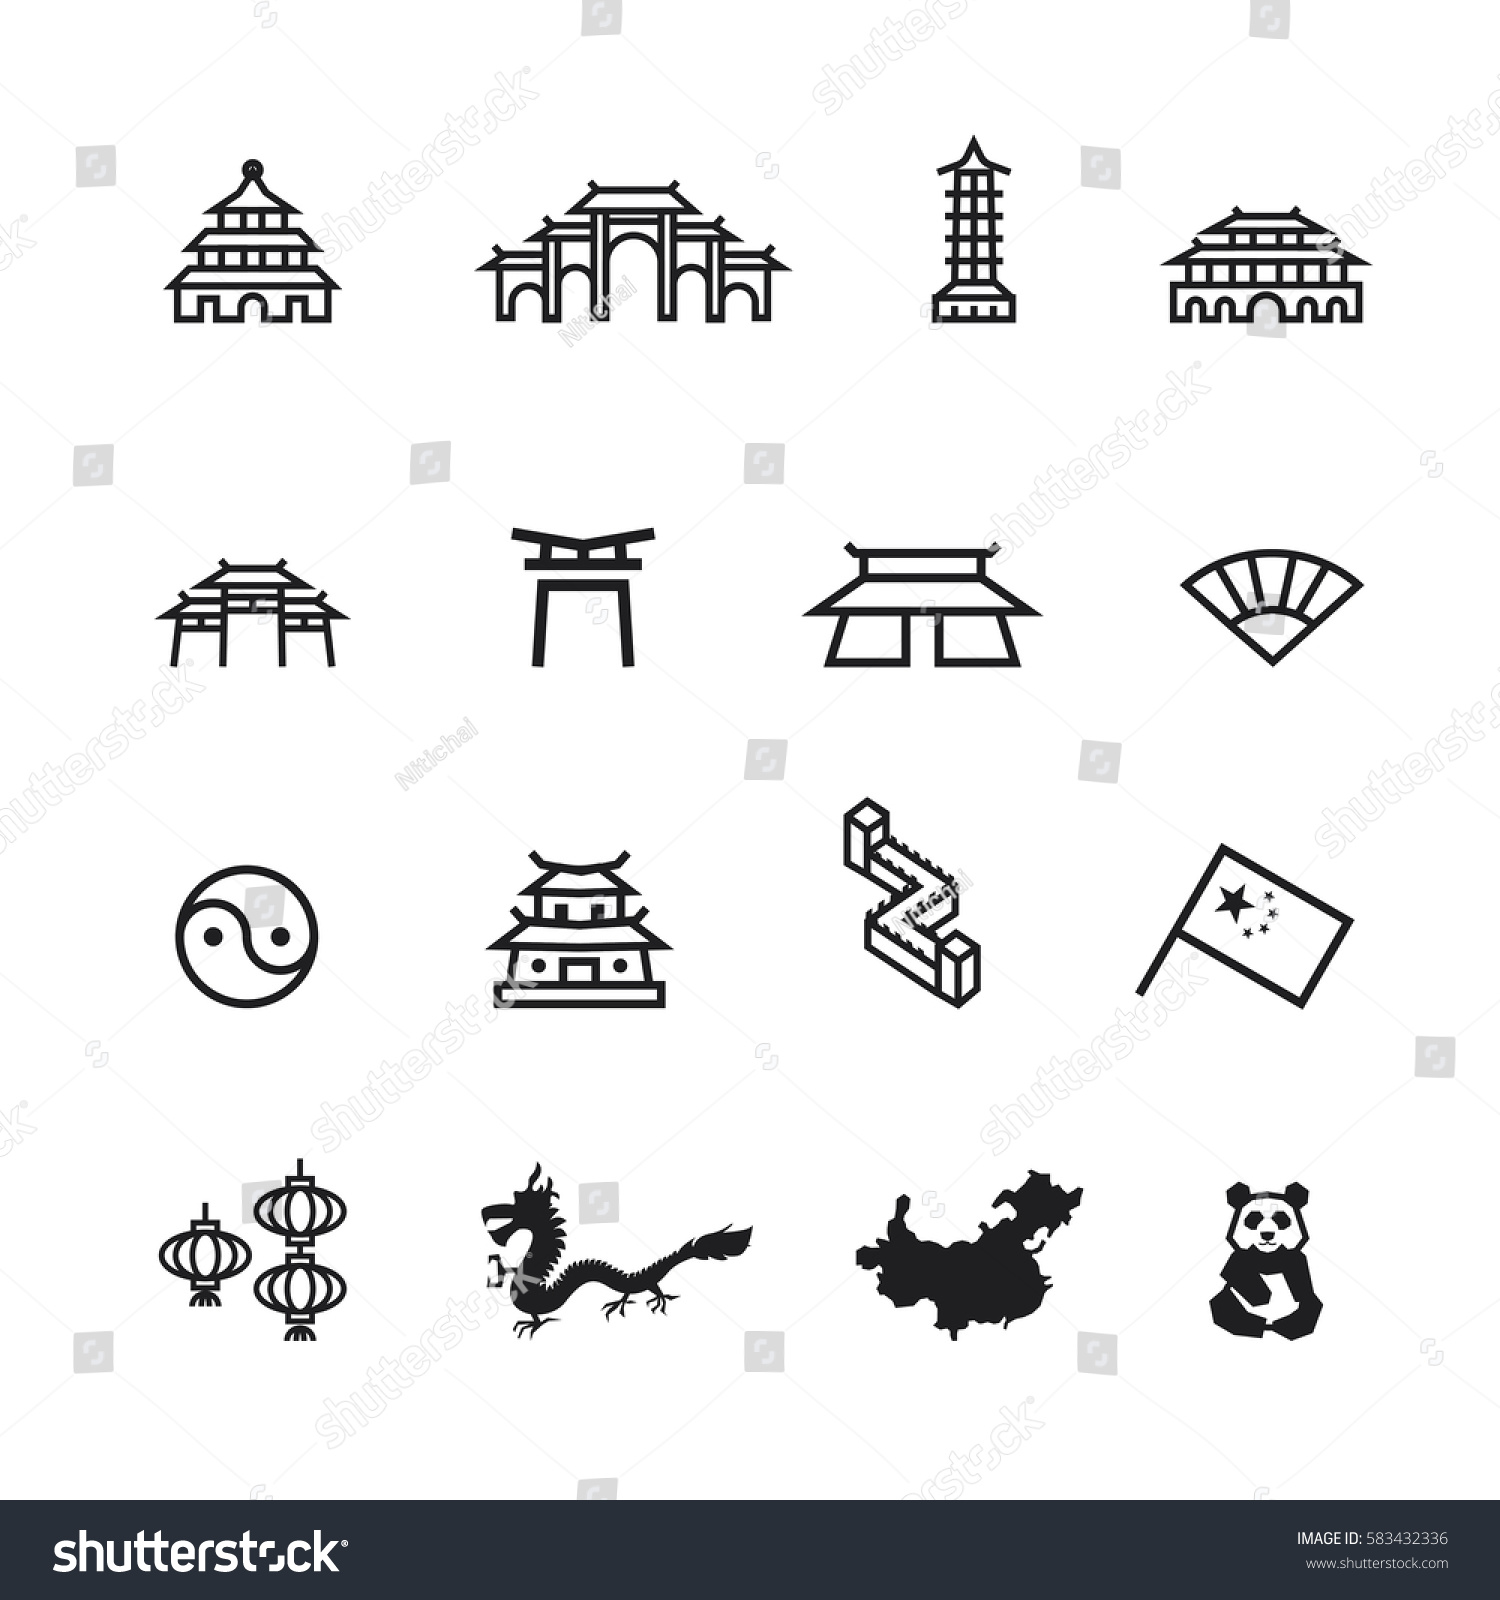 China Icons Setvector Stock Vector Royalty Free 583432336 Shutterstock 6312